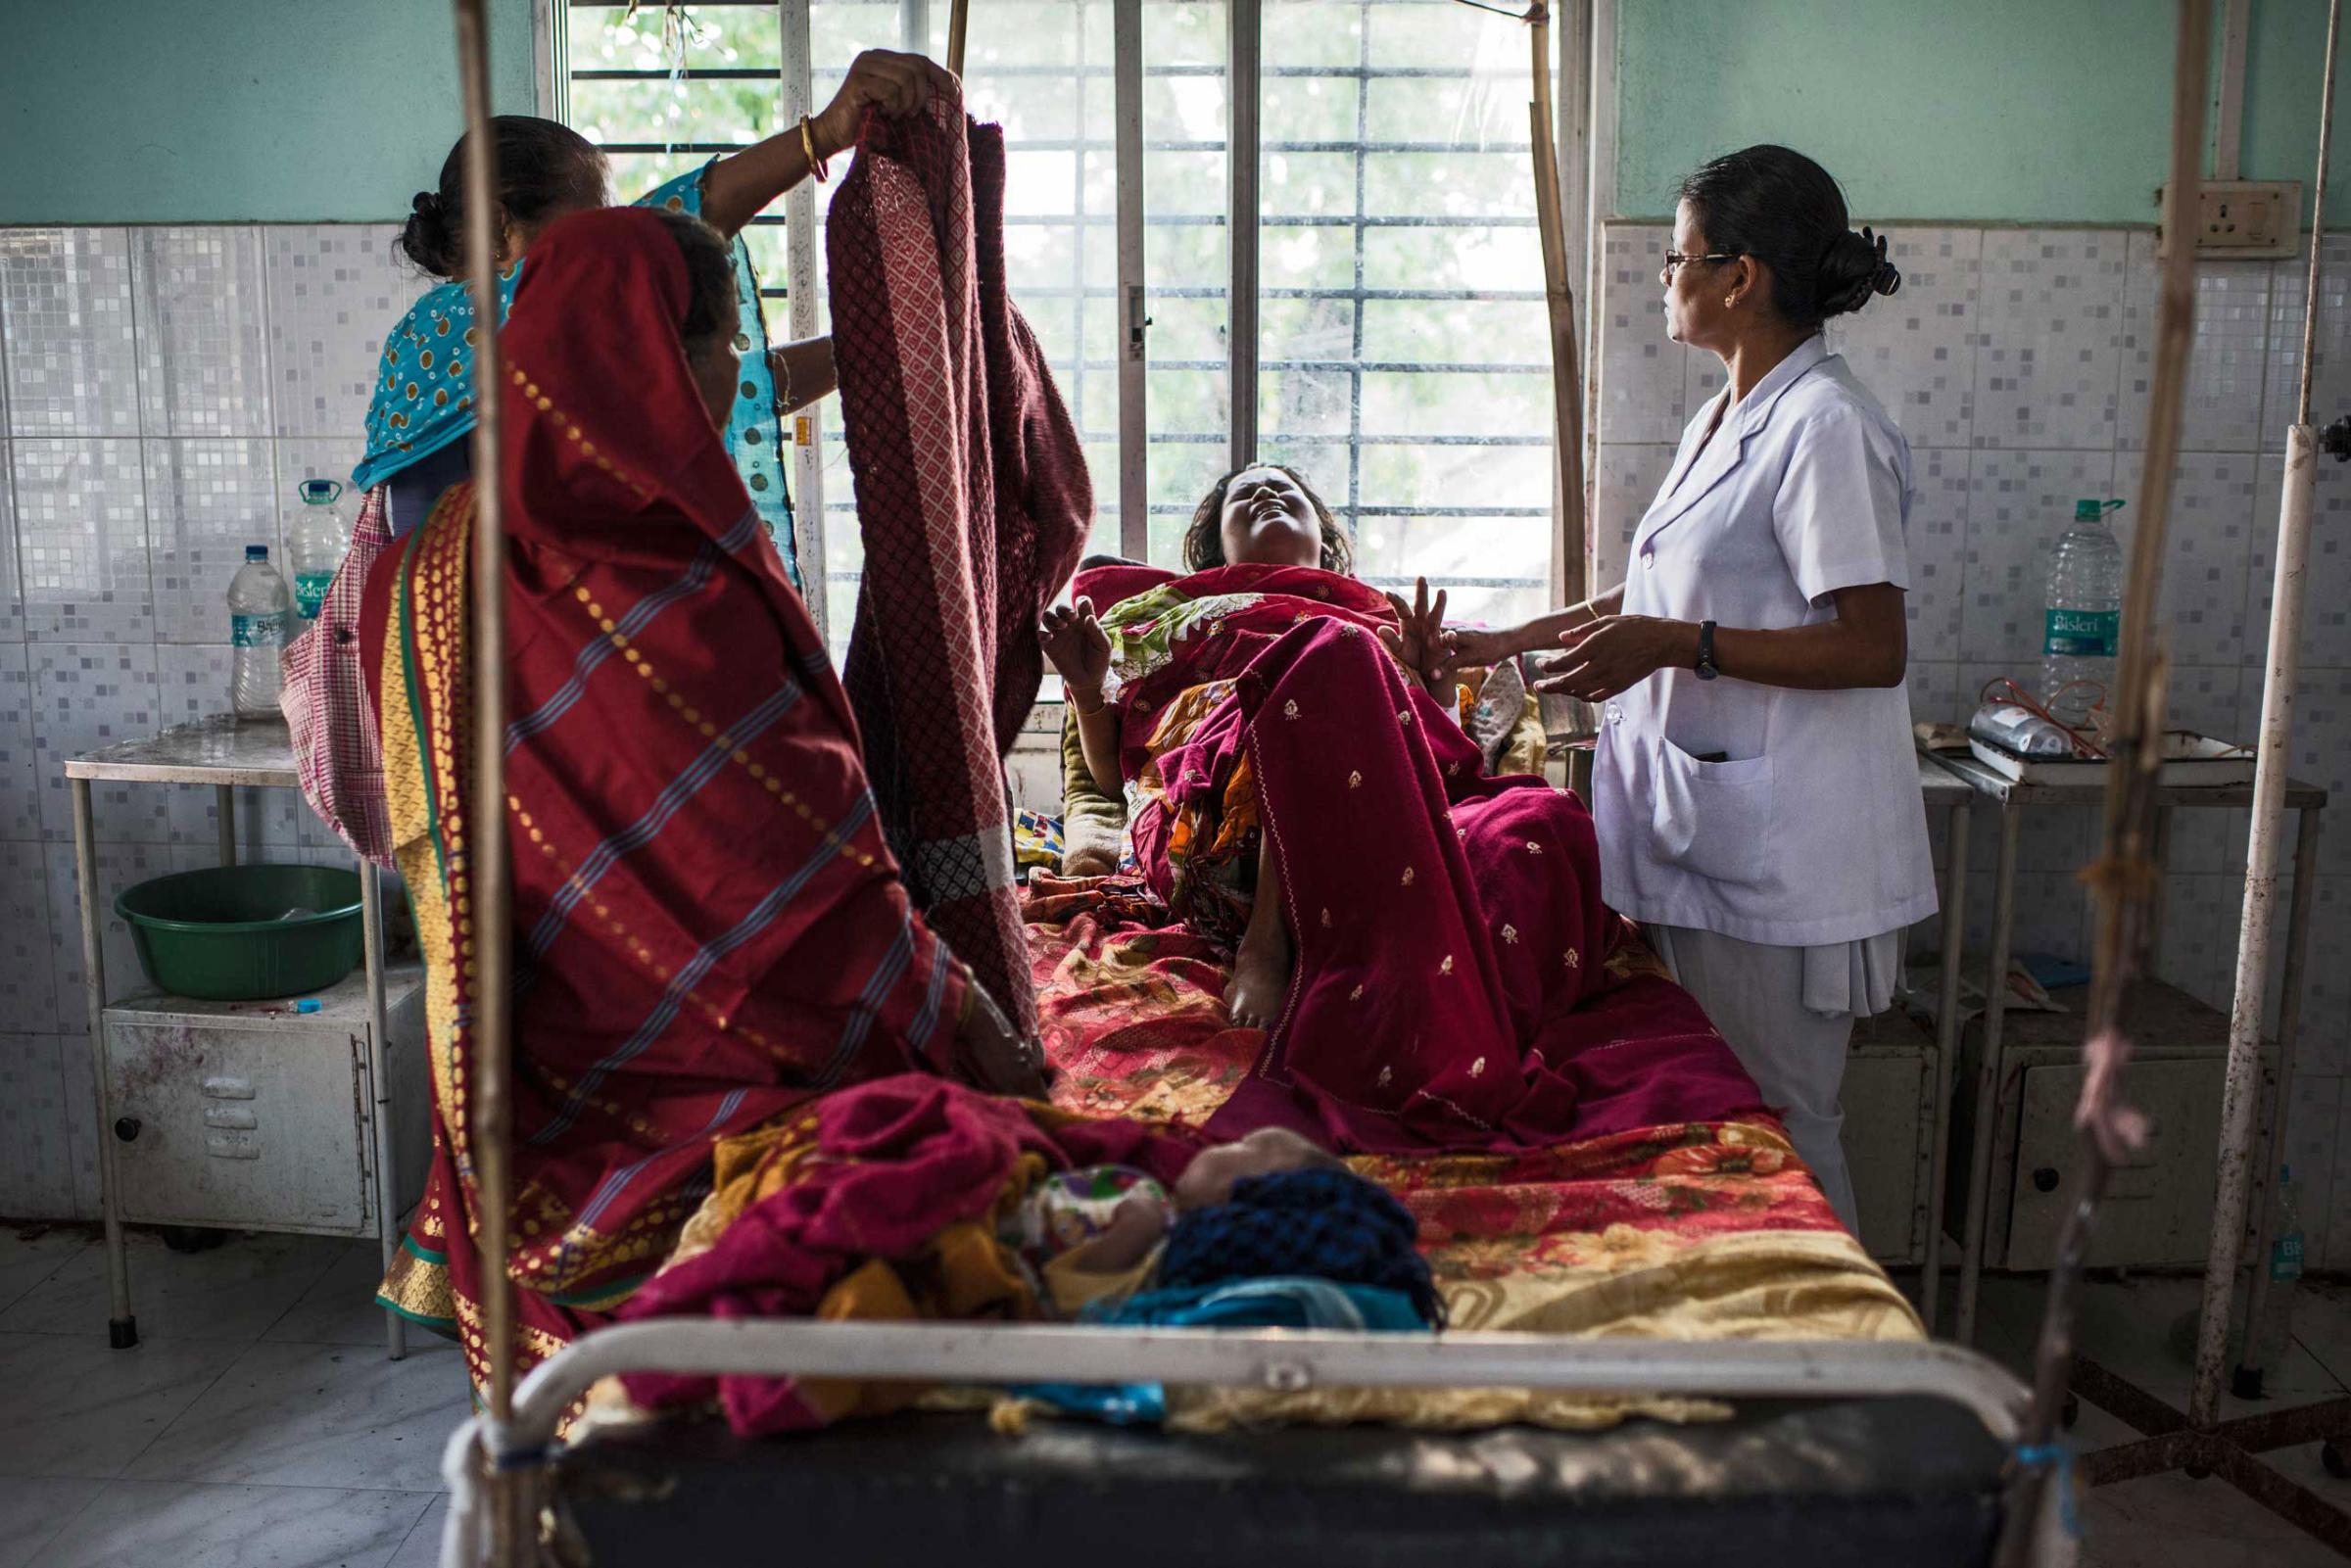 Nazreen Khatoon winces in pain as she lies gravely ill, suffering from severe postpartum anemia at the Tezpur Civil Hospital in Tezpur, Assam, India.